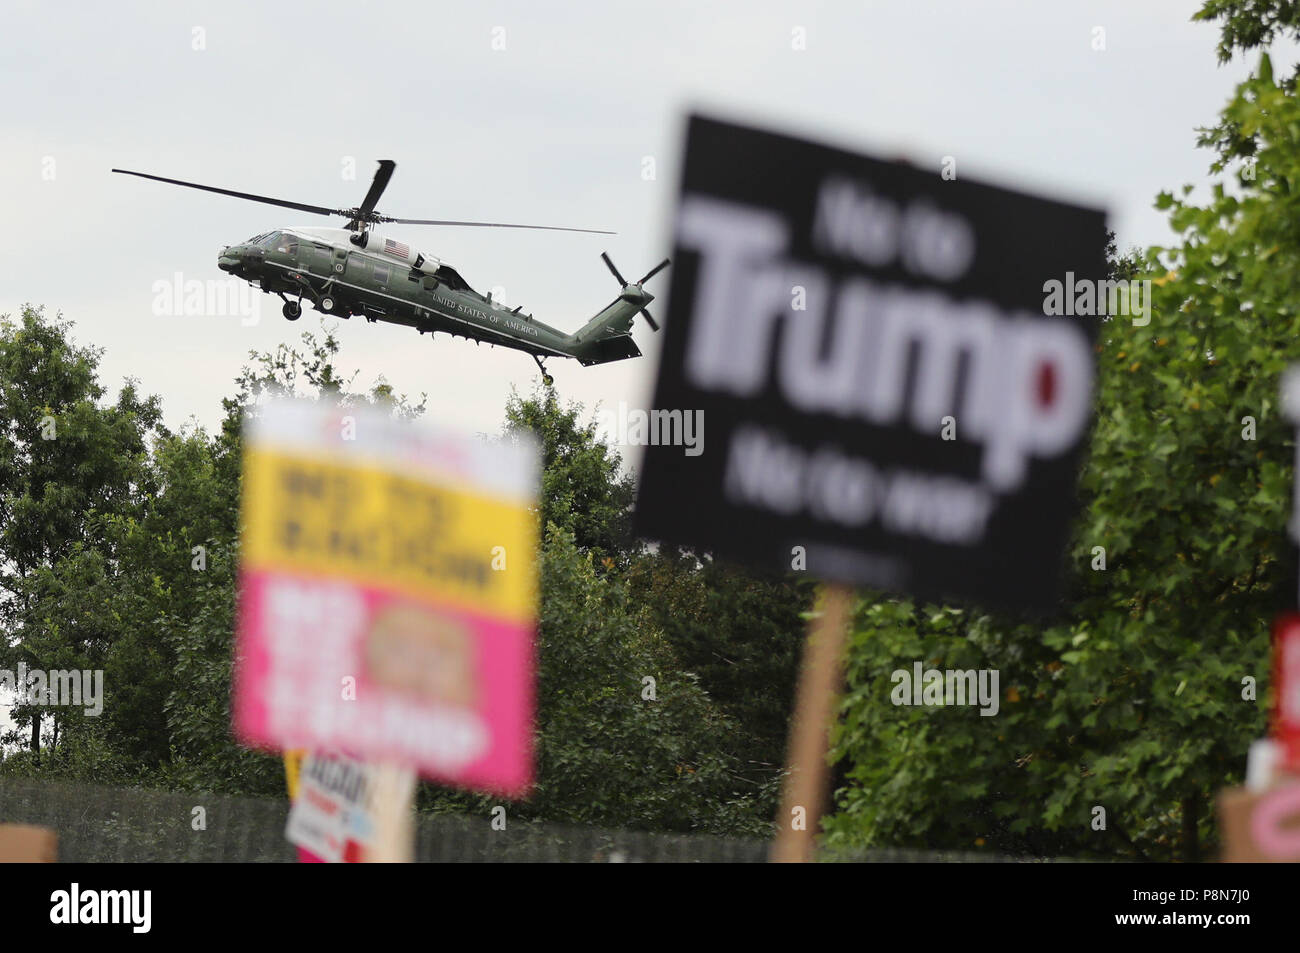 A US presidential helicopter lands in the grounds of the US ambassador residence in Regent's Park, London whilst demonstrators gather as part of the protests against the visit of US President Donald Trump to the UK. Stock Photo